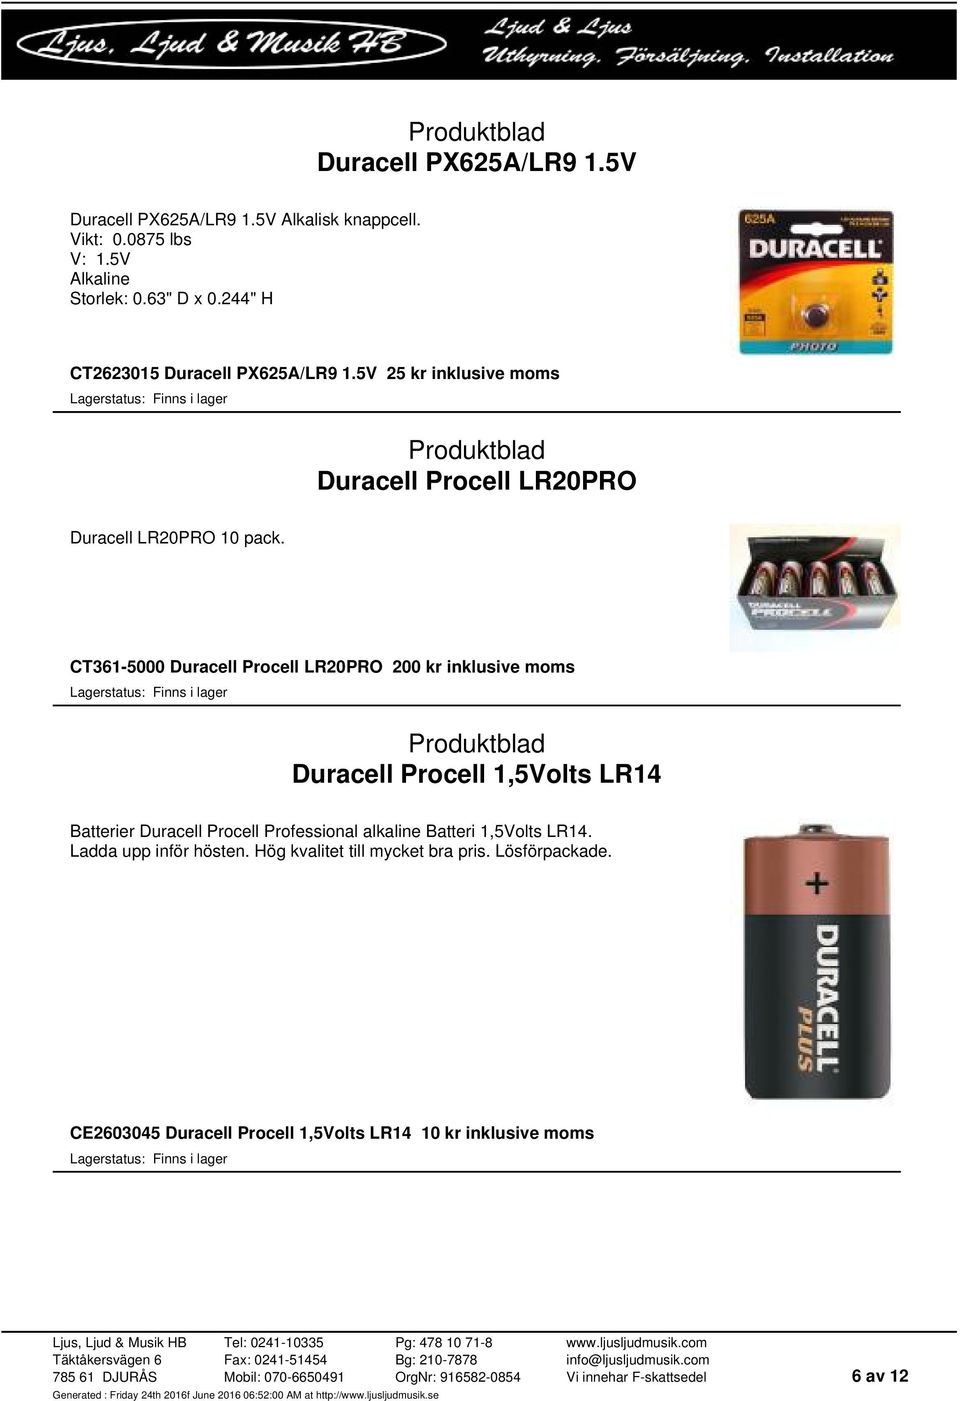 CT361-5000 Duracell Procell LR20PRO 200 kr inklusive moms Duracell Procell 1,5Volts LR14 Batterier Duracell Procell Professional